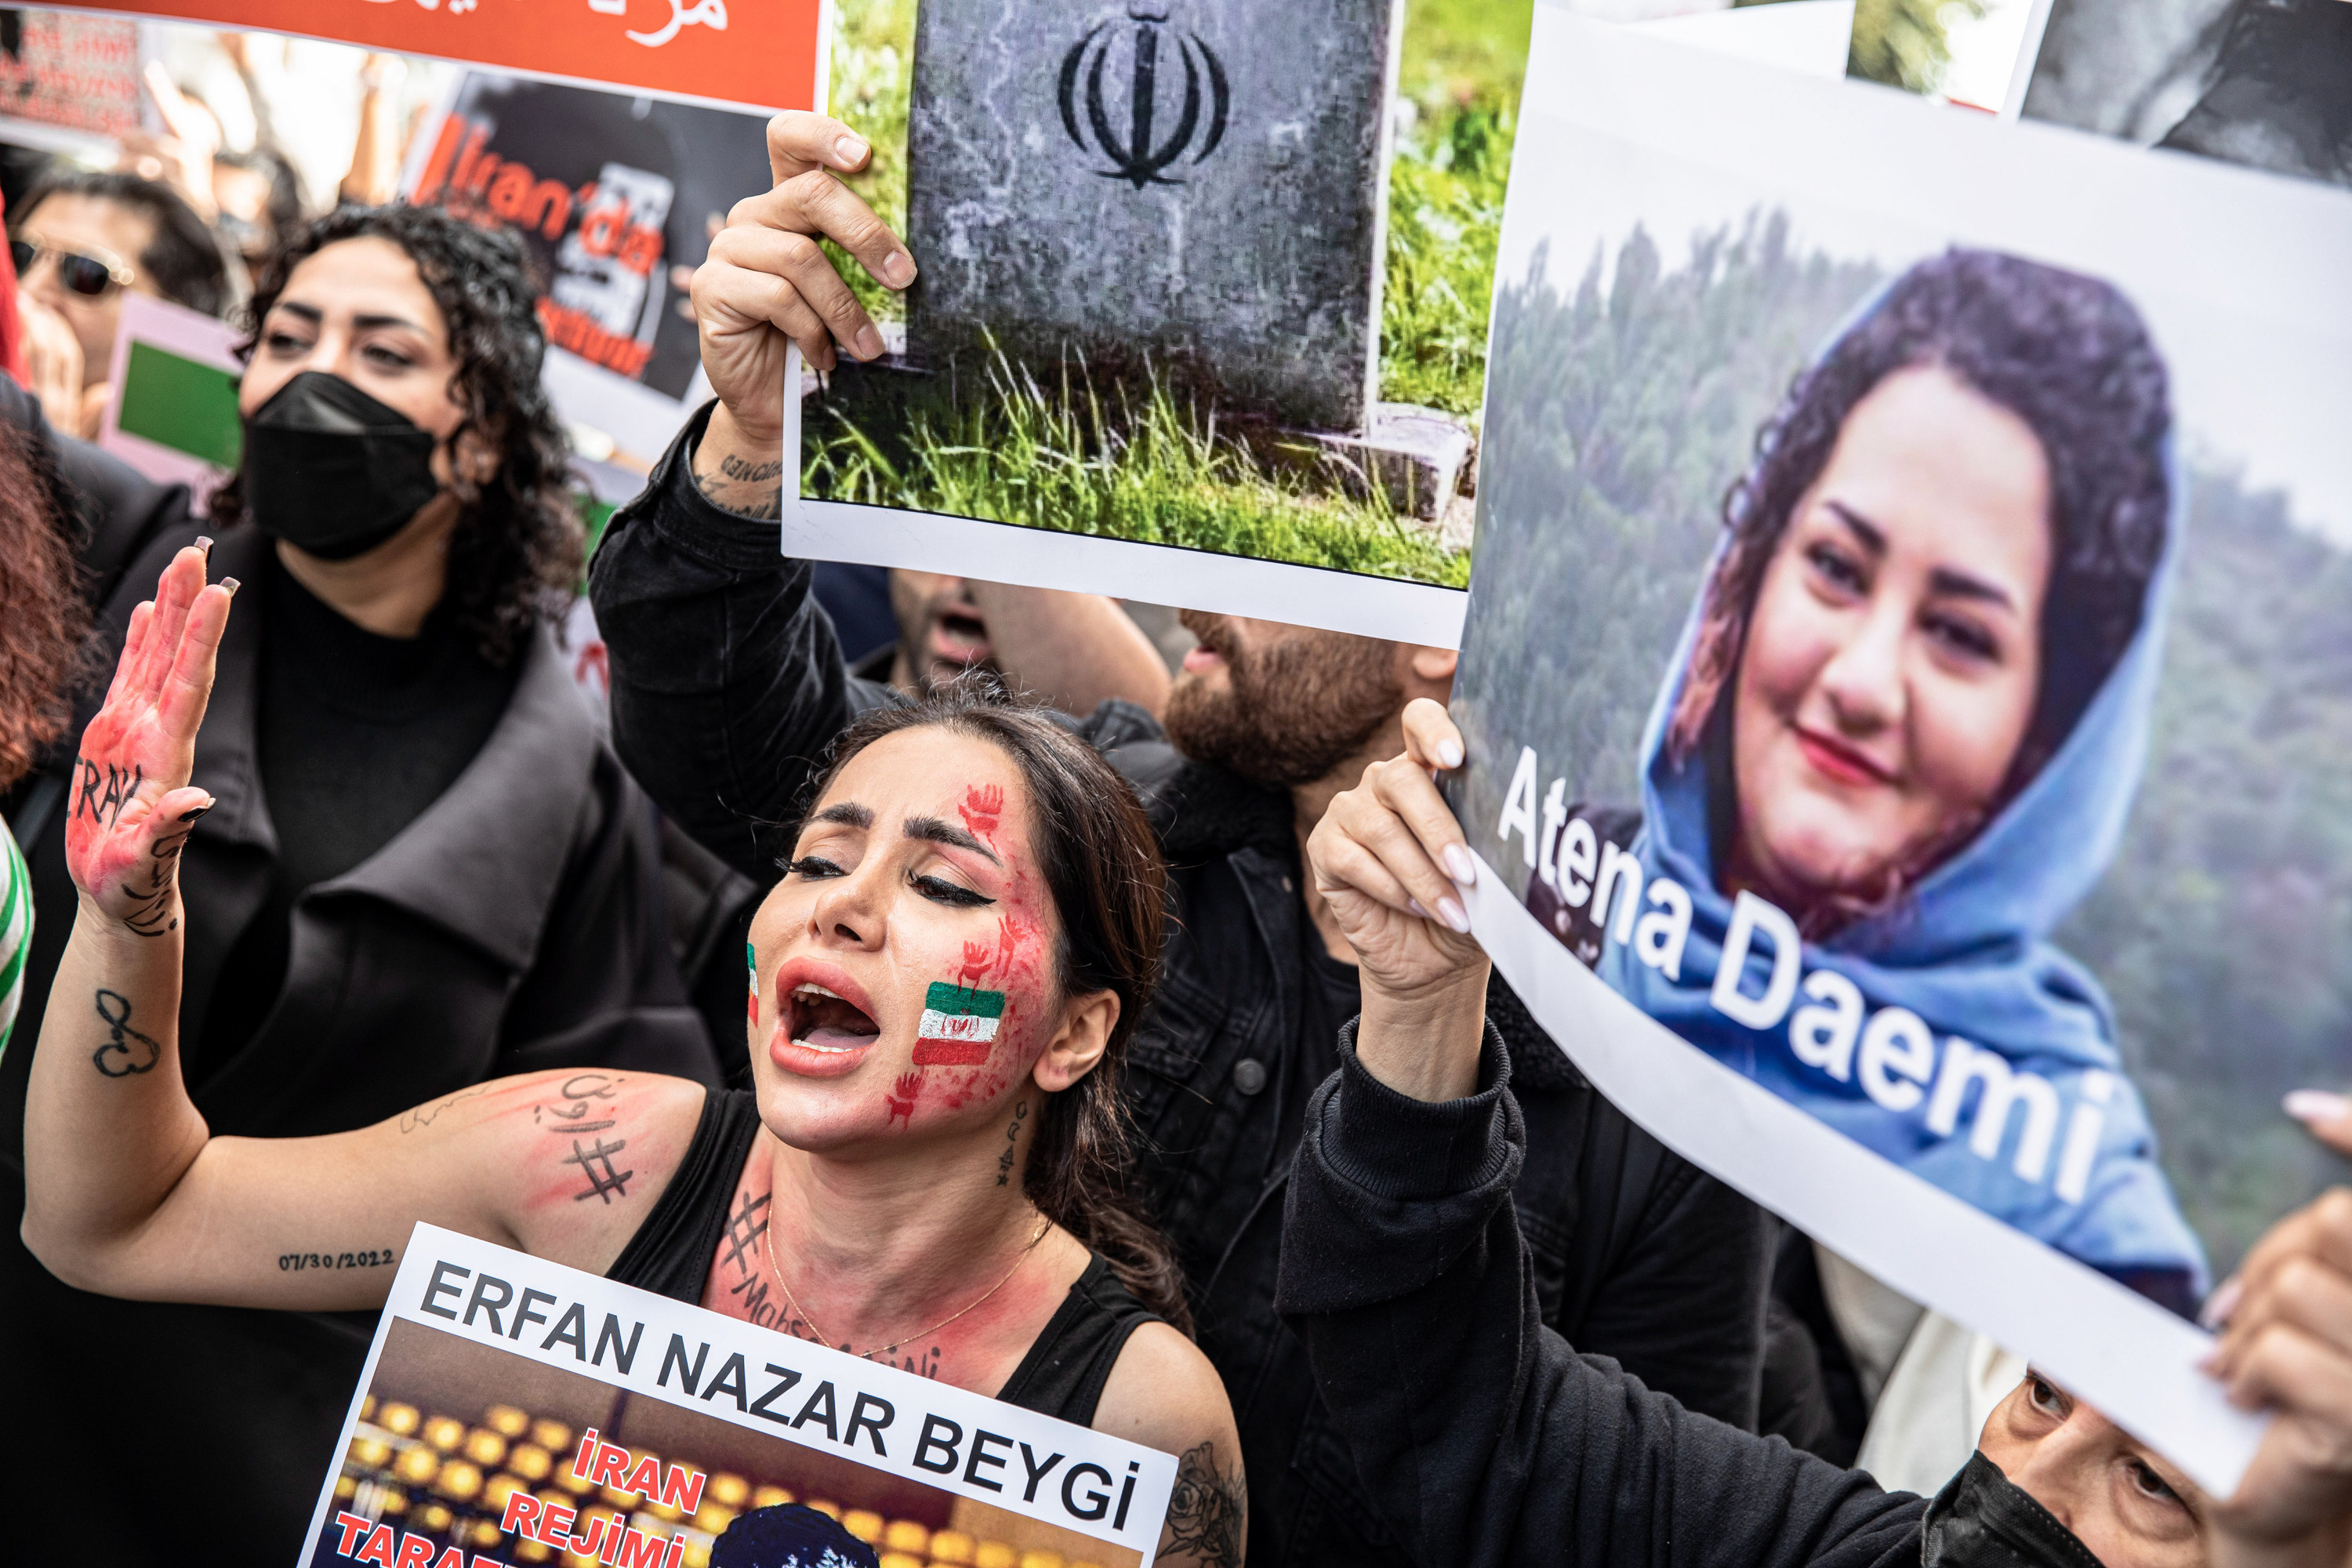 A protester in Turkey with the Iranian flag painted on her face chants slogans outside the Iranian consulate in Istanbul during a protest over the death of Iranian Mahsa Amini